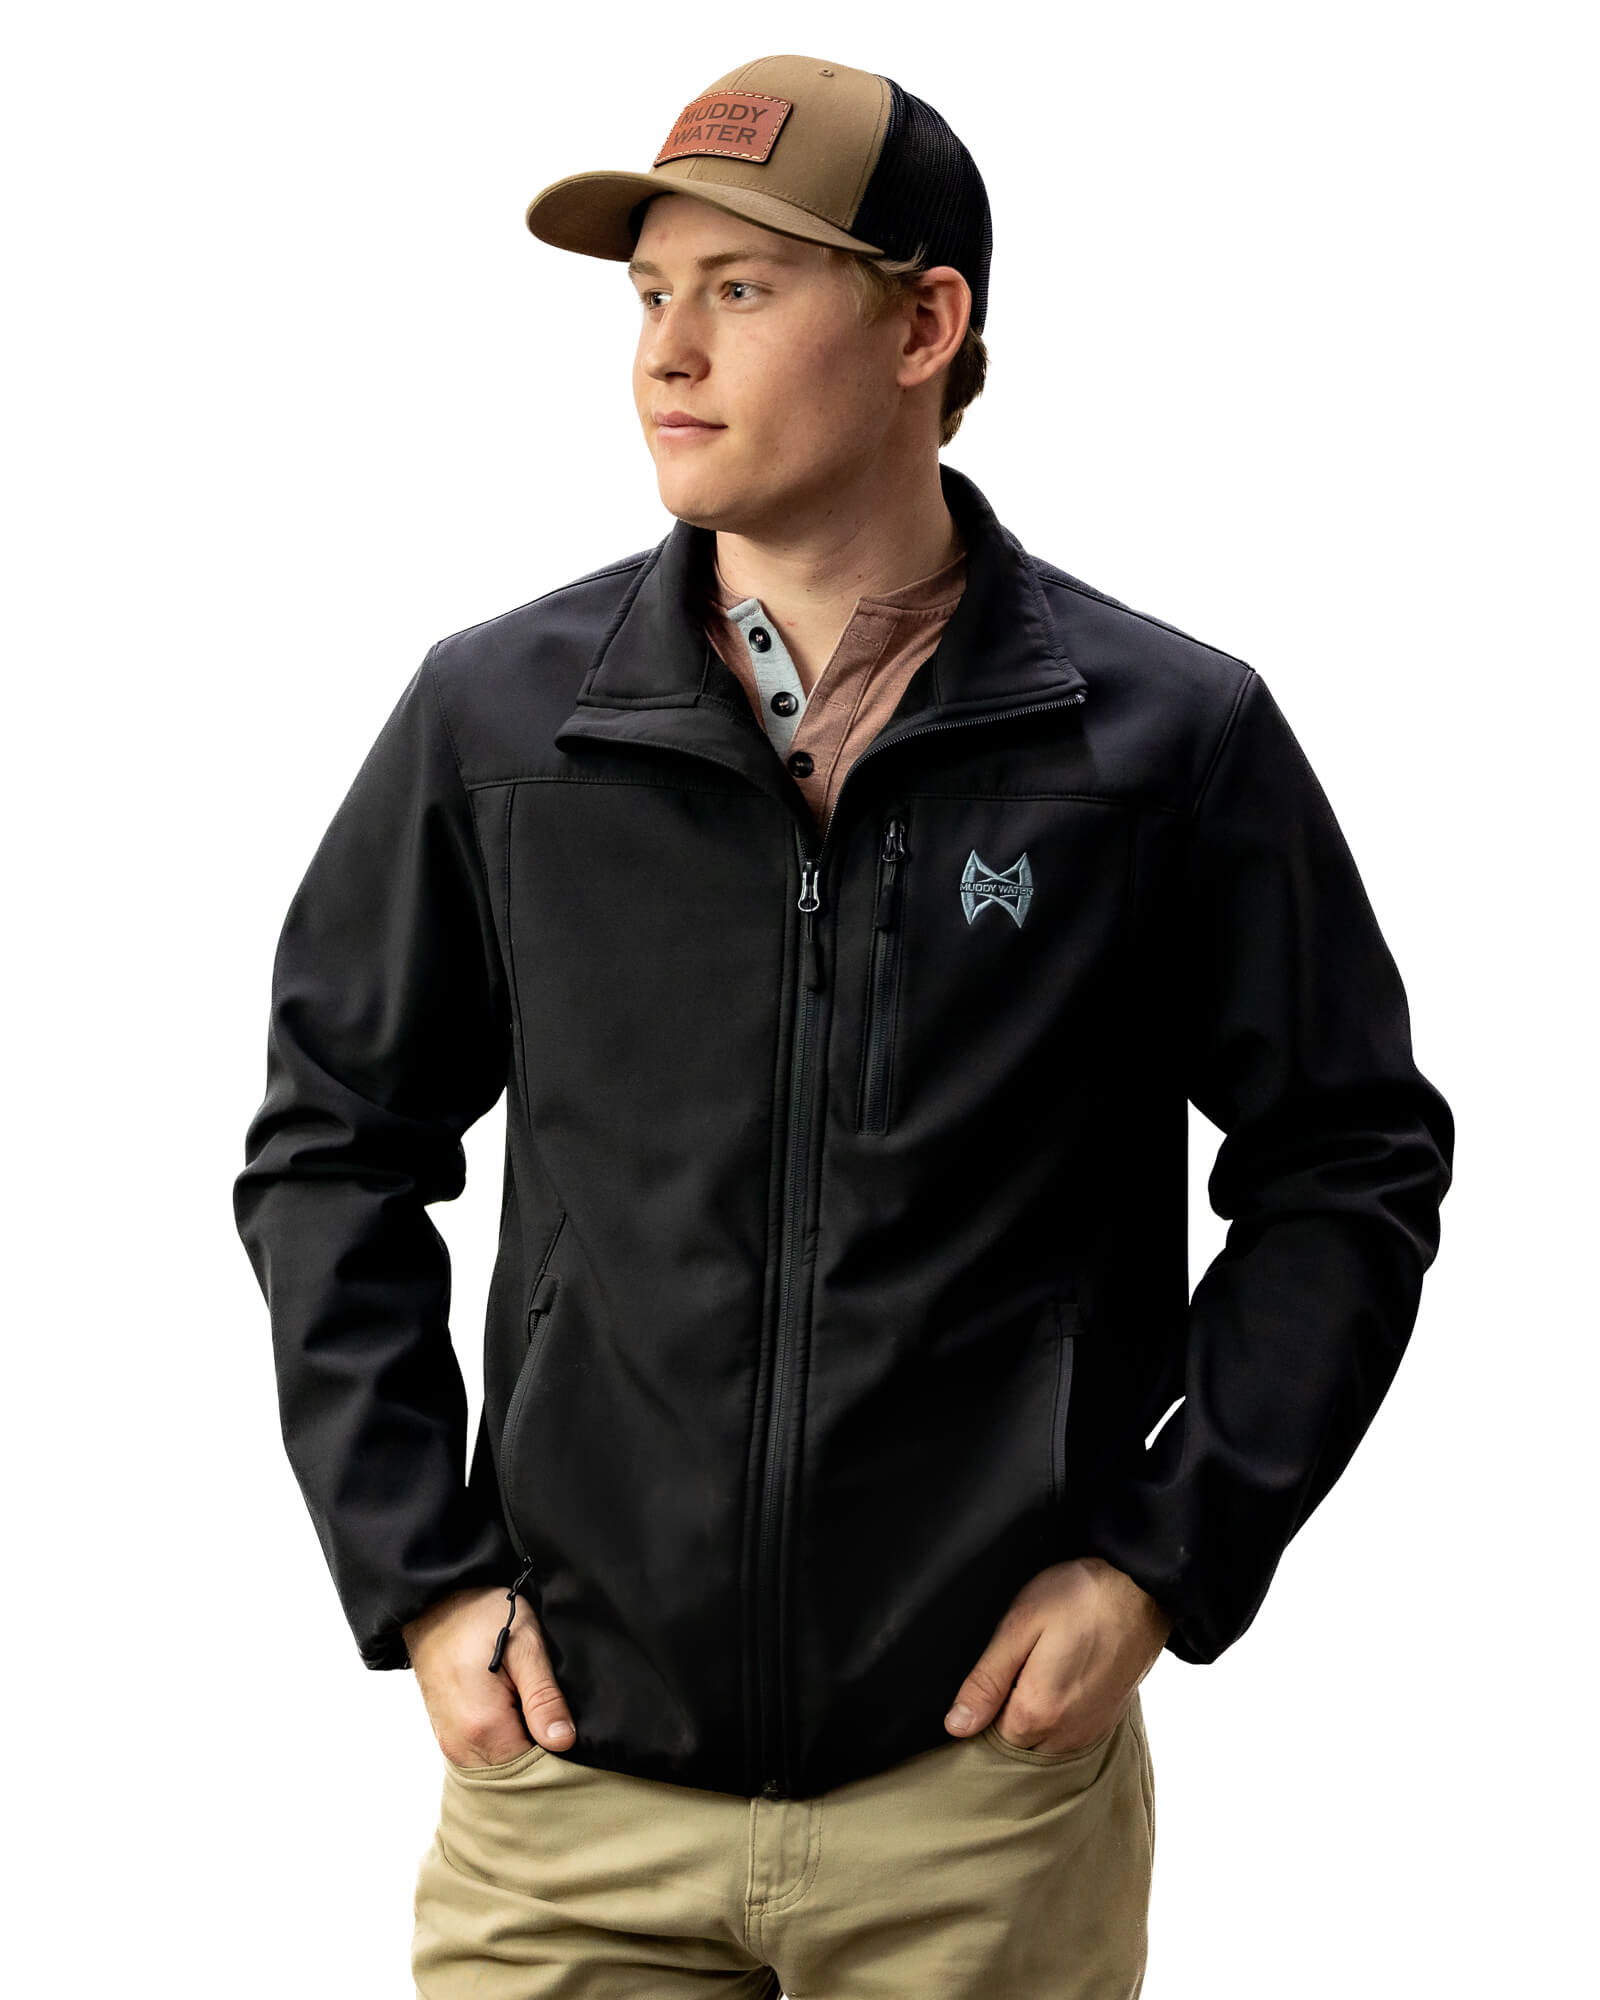 Outfitter Series Stalker Jacket - Black - Muddy Water Outdoors